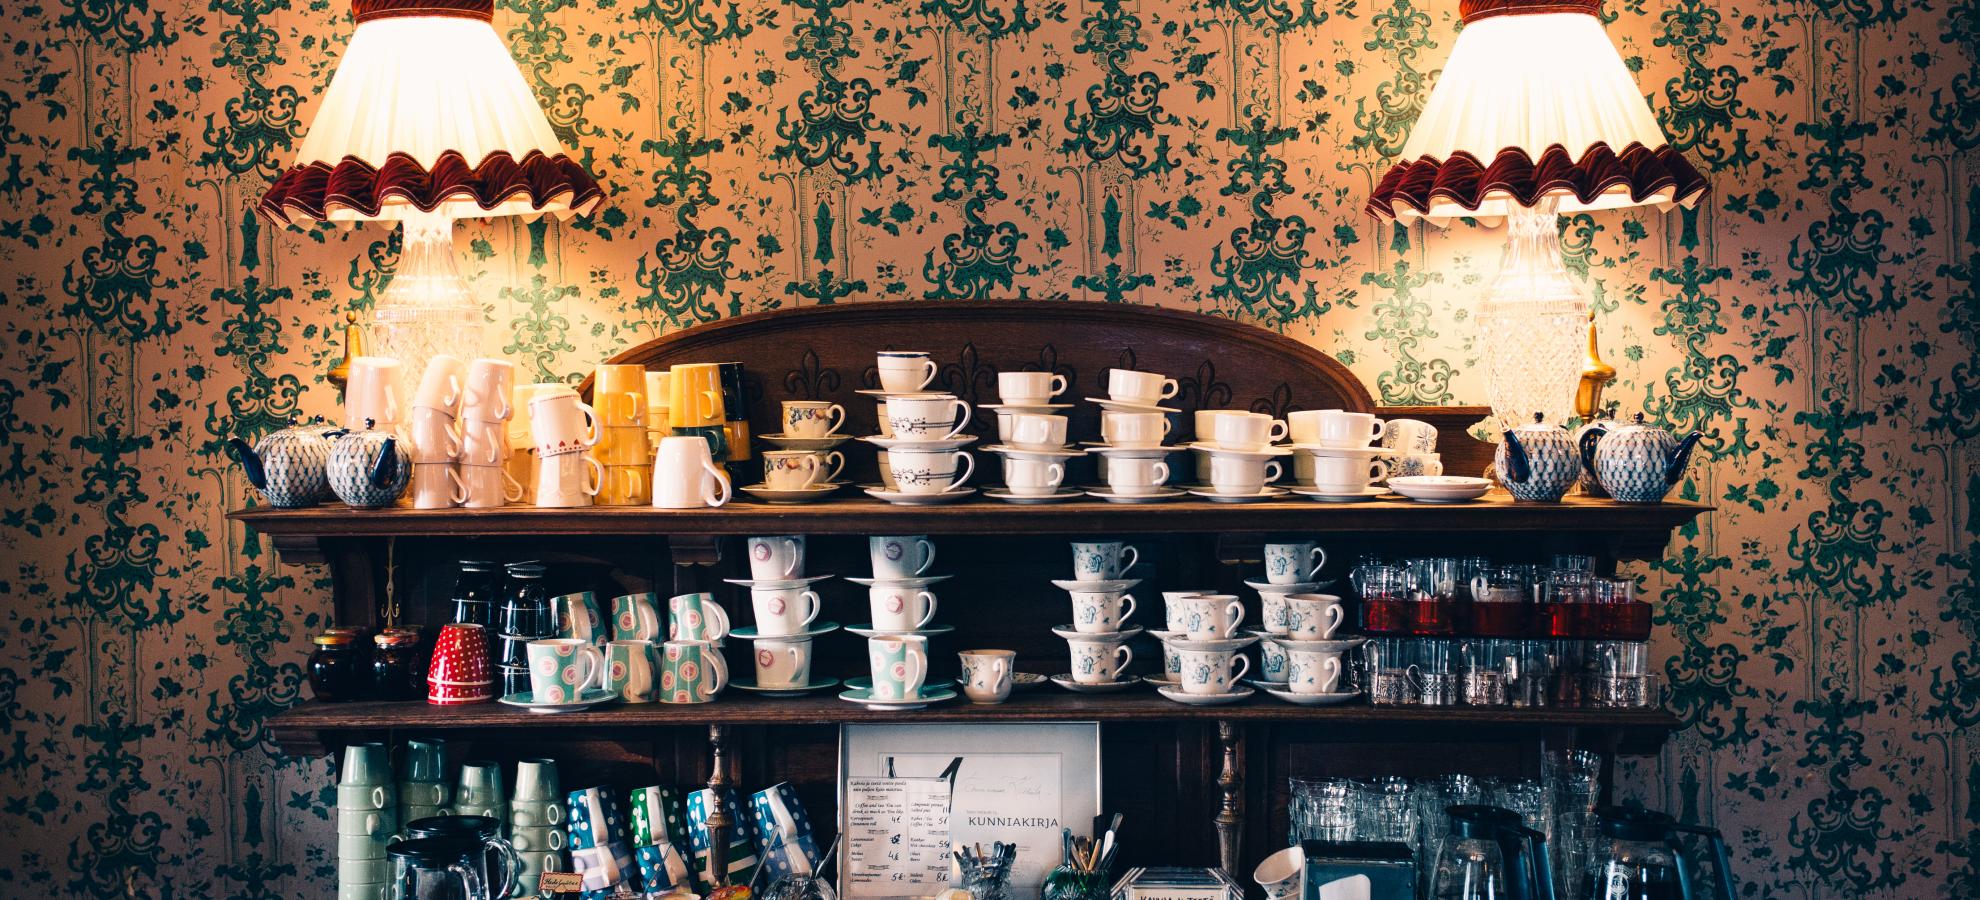 In front of a heavily patterned, cream and green traditional wallpaper, stands two lamps either side of a mahogany cabinet, its shelves full of teacups, mugs and glasses. 